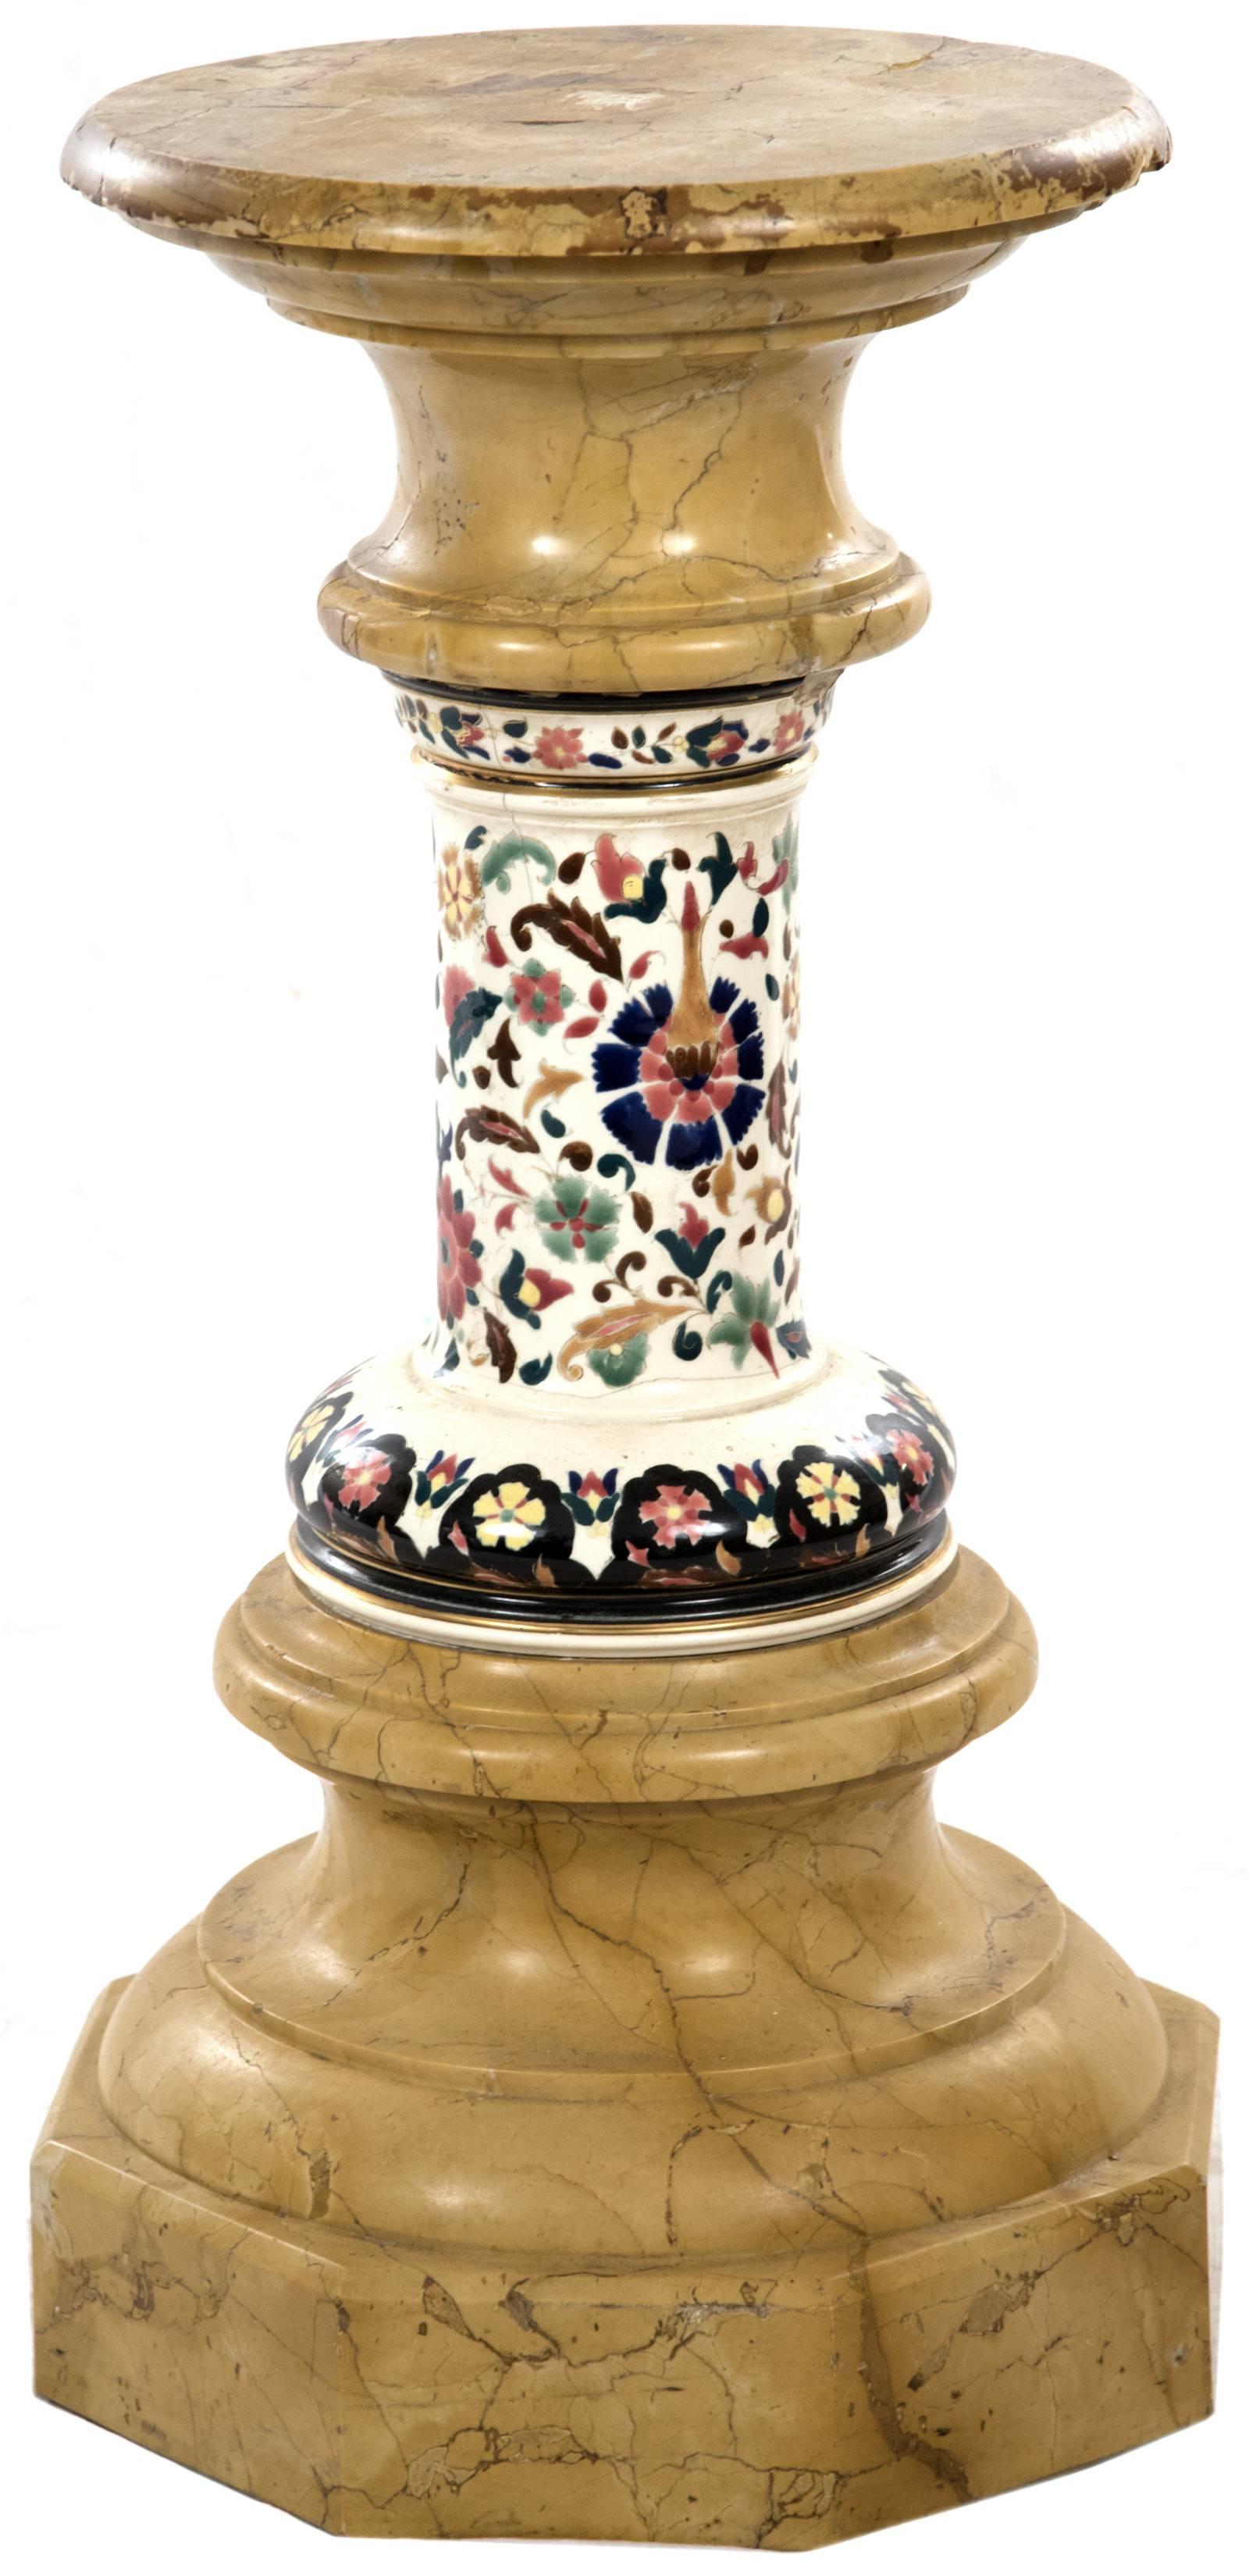 19th Century Pair of Marble and Enamel Pedestals